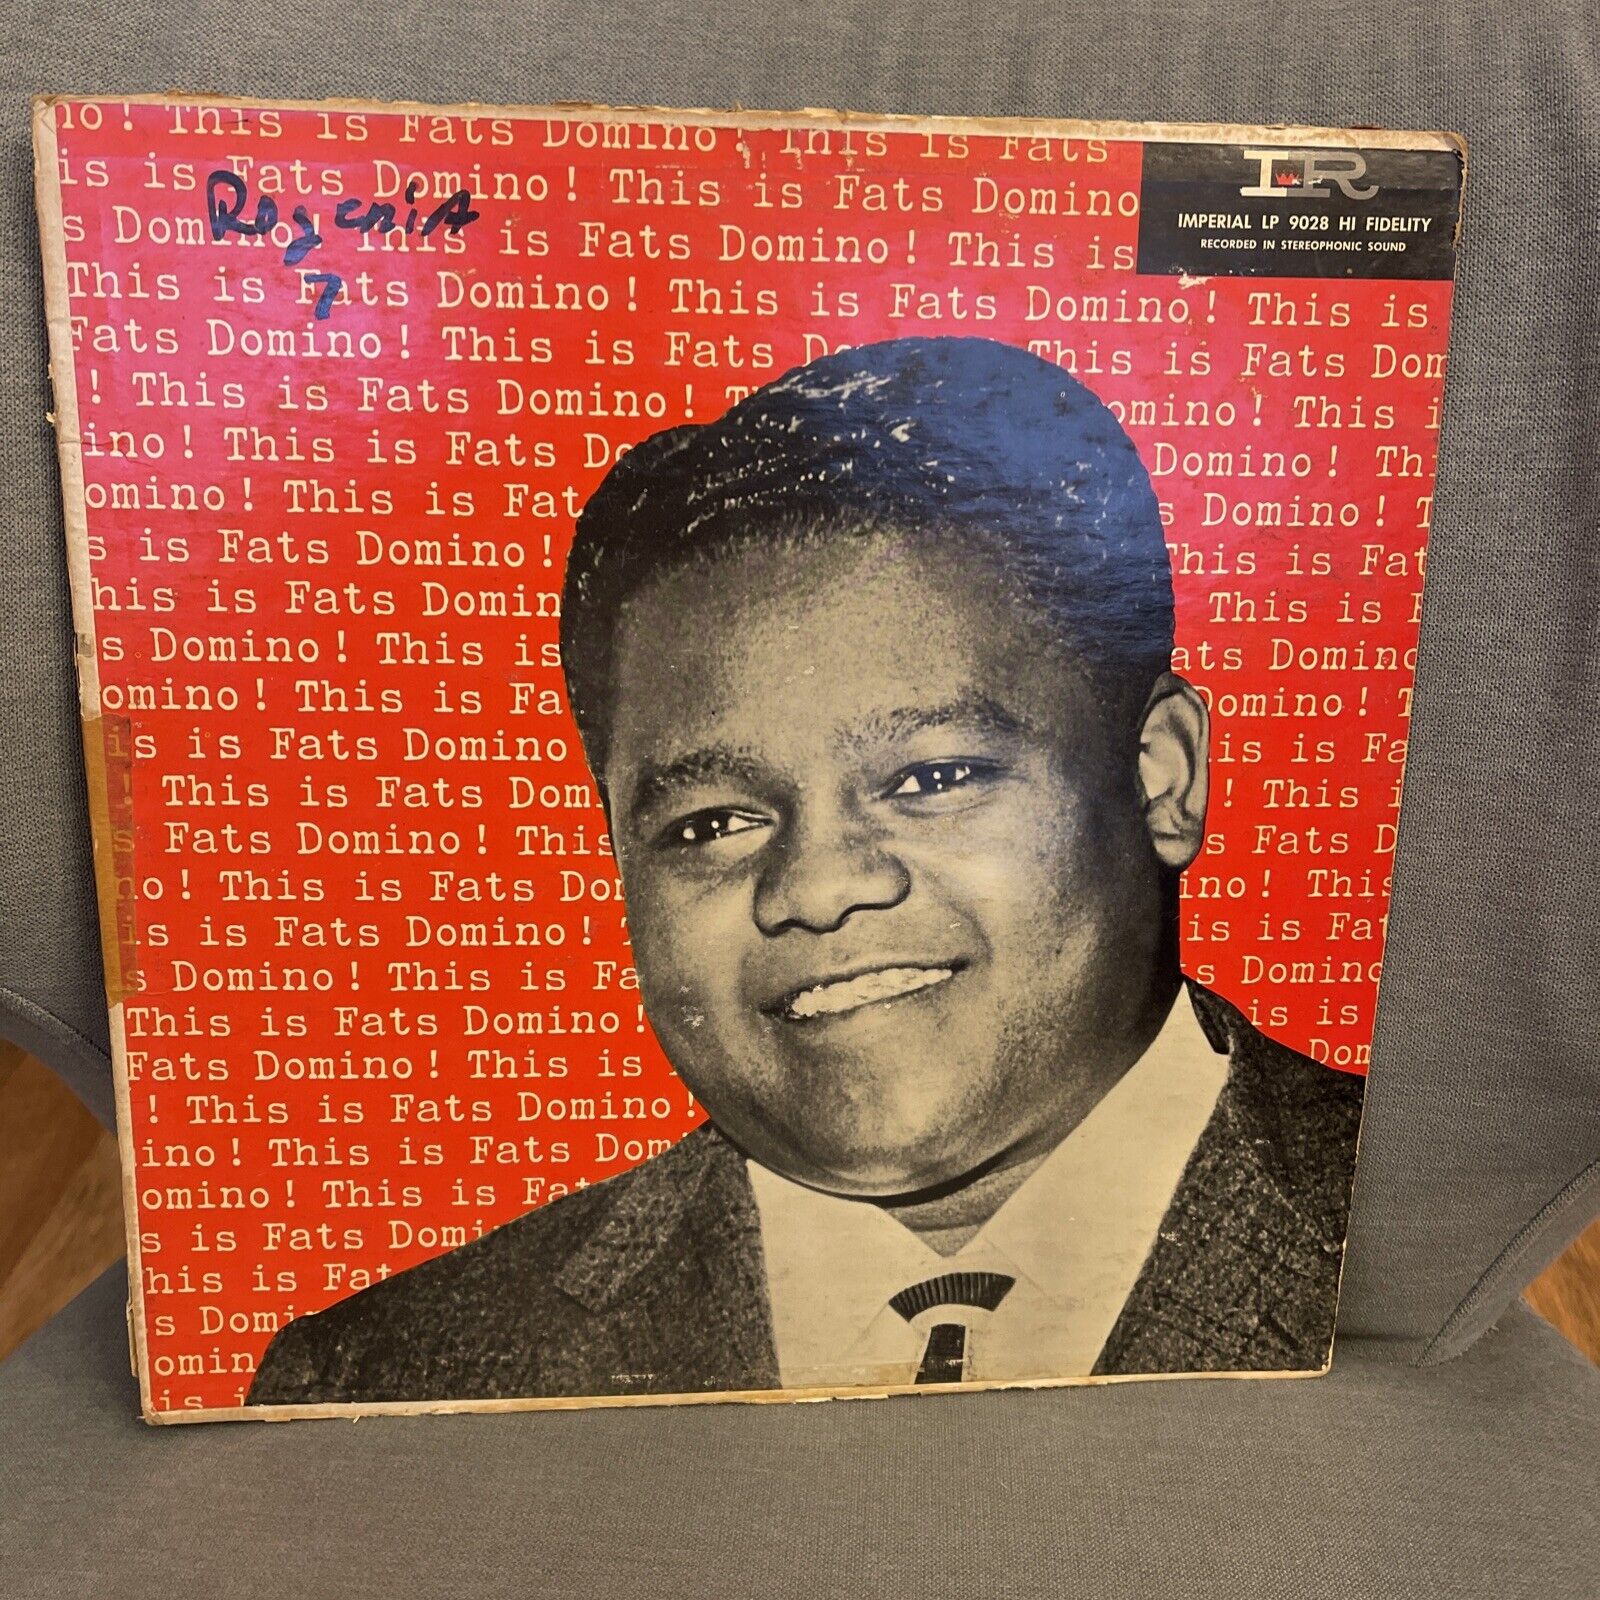 FATS DOMINO - THIS IS FATS DOMINO IMPERIAL MONO  9028 LP